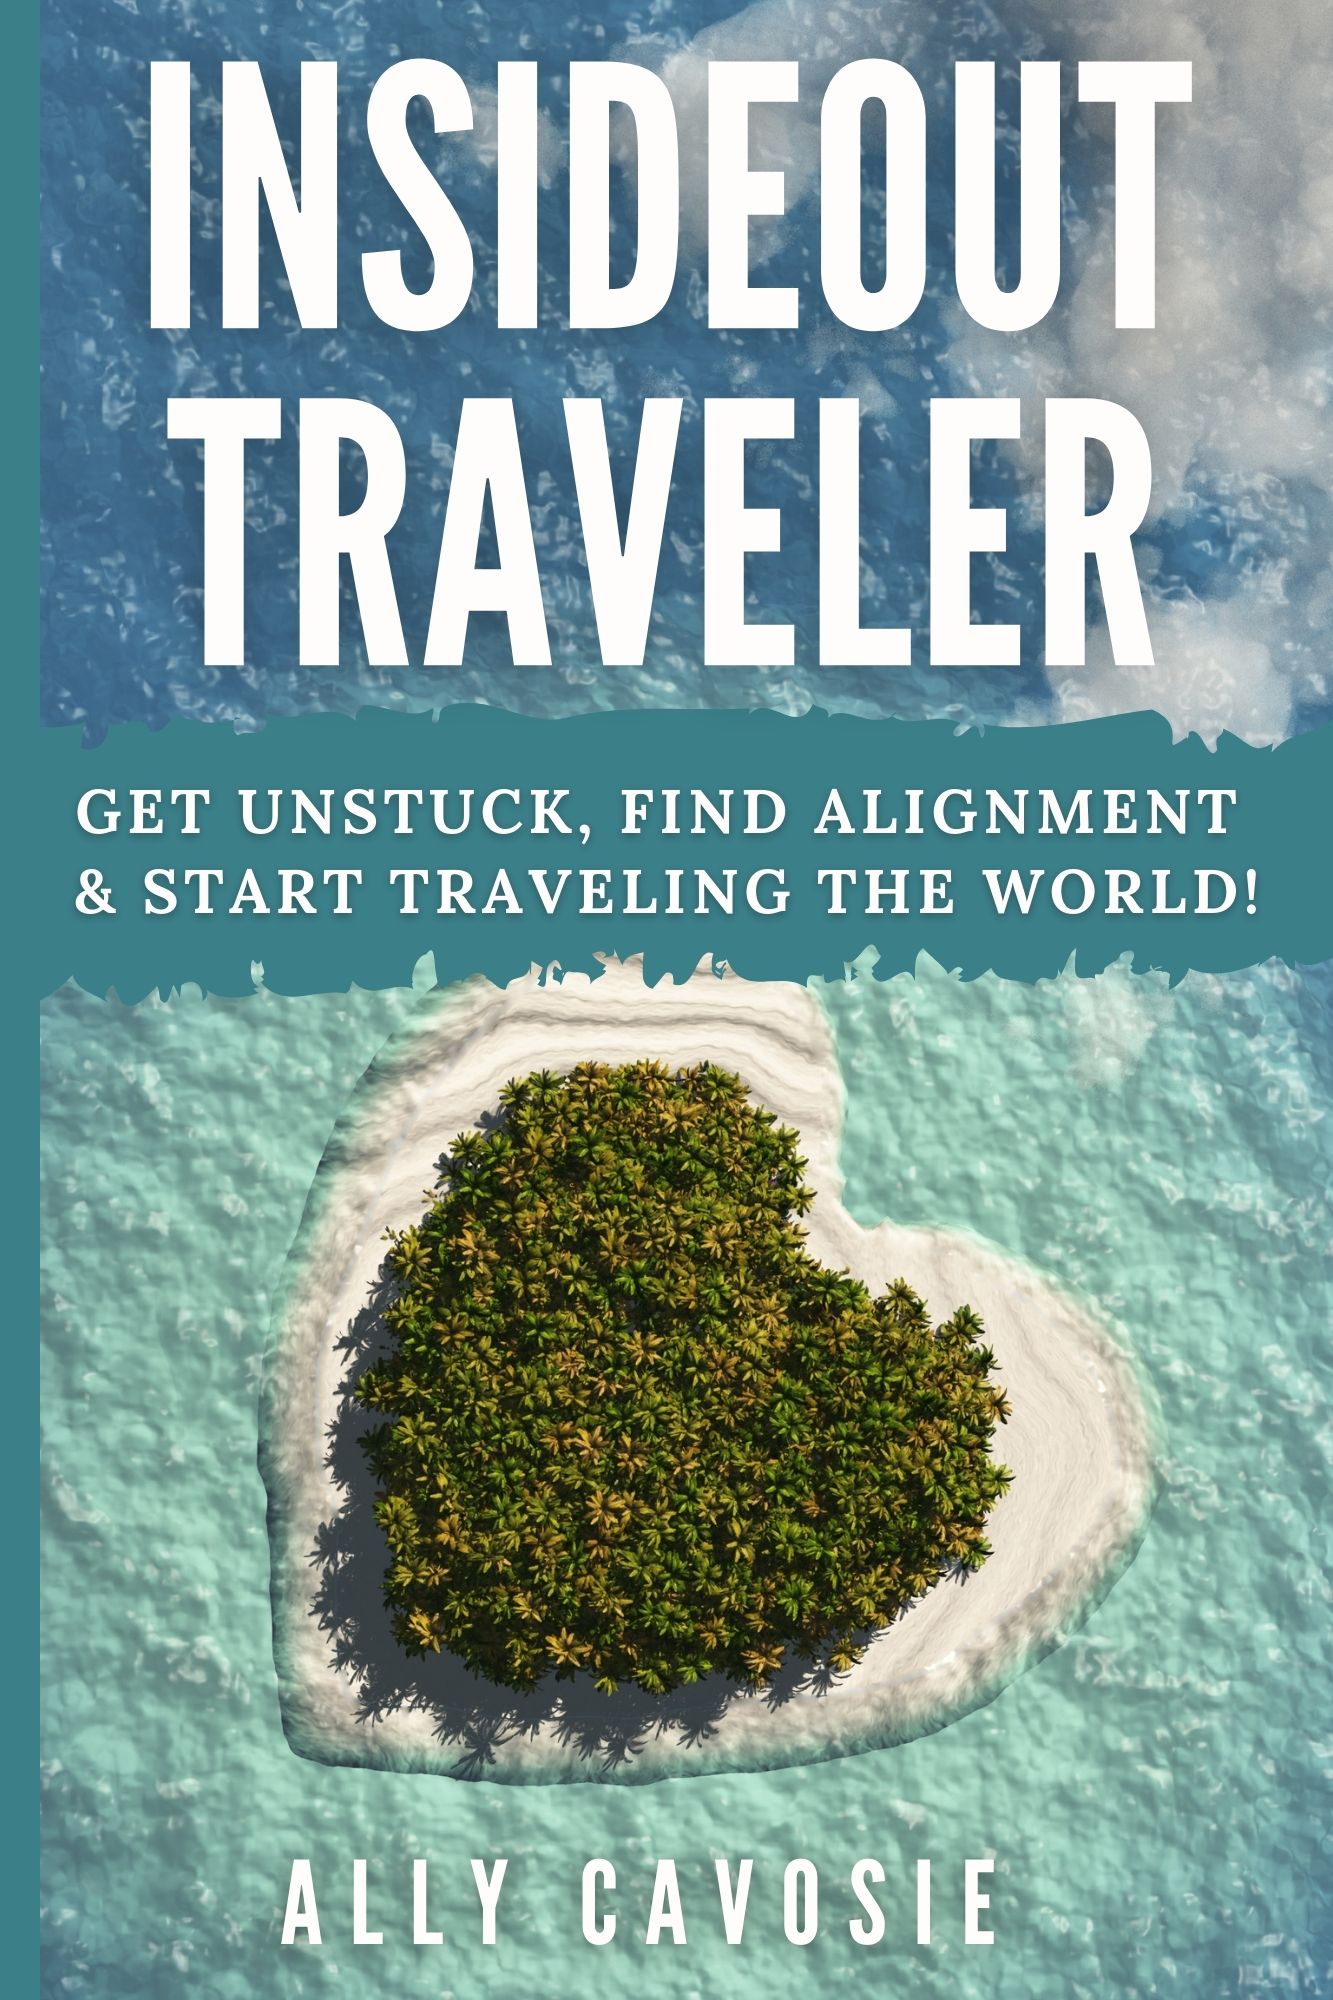 Ally Cavosie Launches New Book Titled The Insideout Traveler 